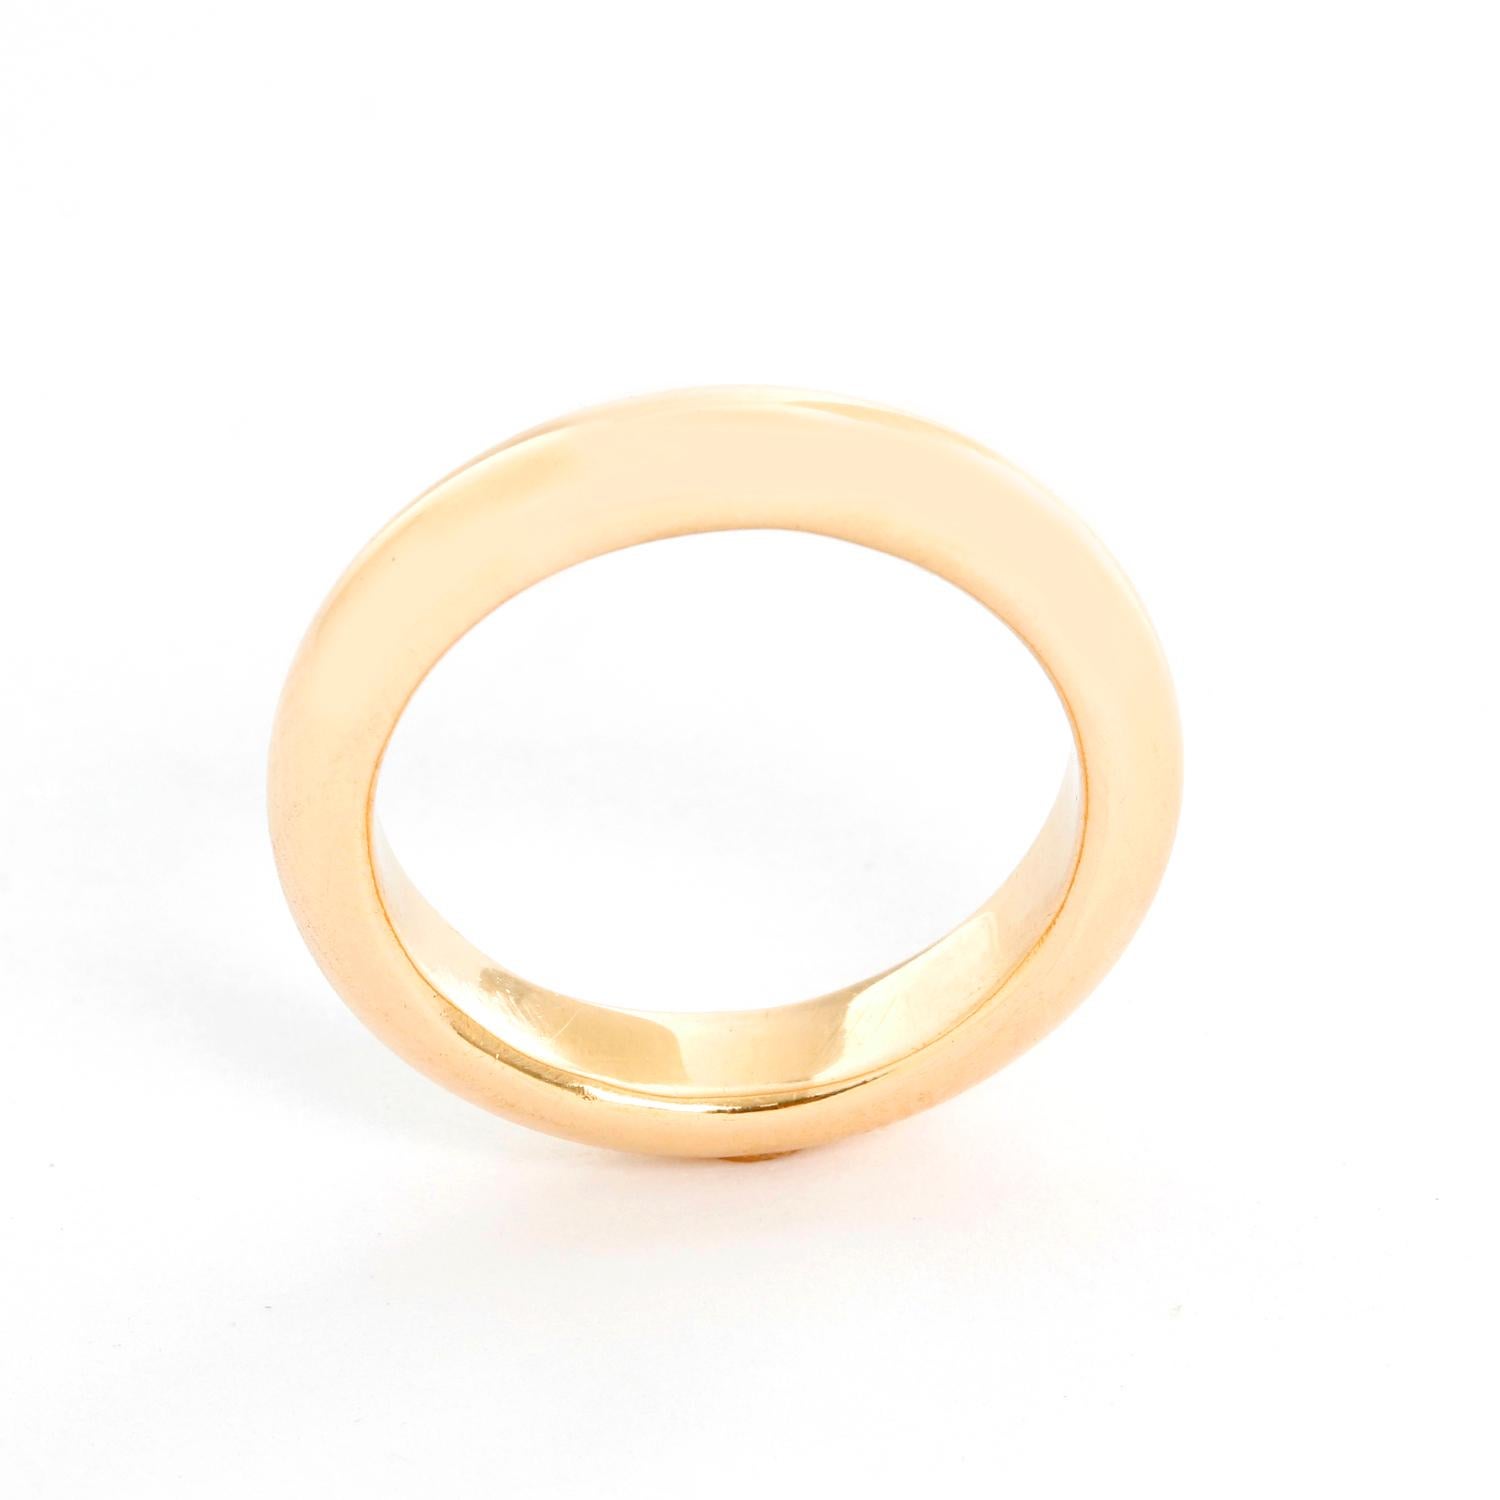 18K Yellow Gold Thin Wedding Band Size 6.5 - 18K Yellow gold gold band. Thickness 4 mm.  Total weight 6 grams. Size 6.5.